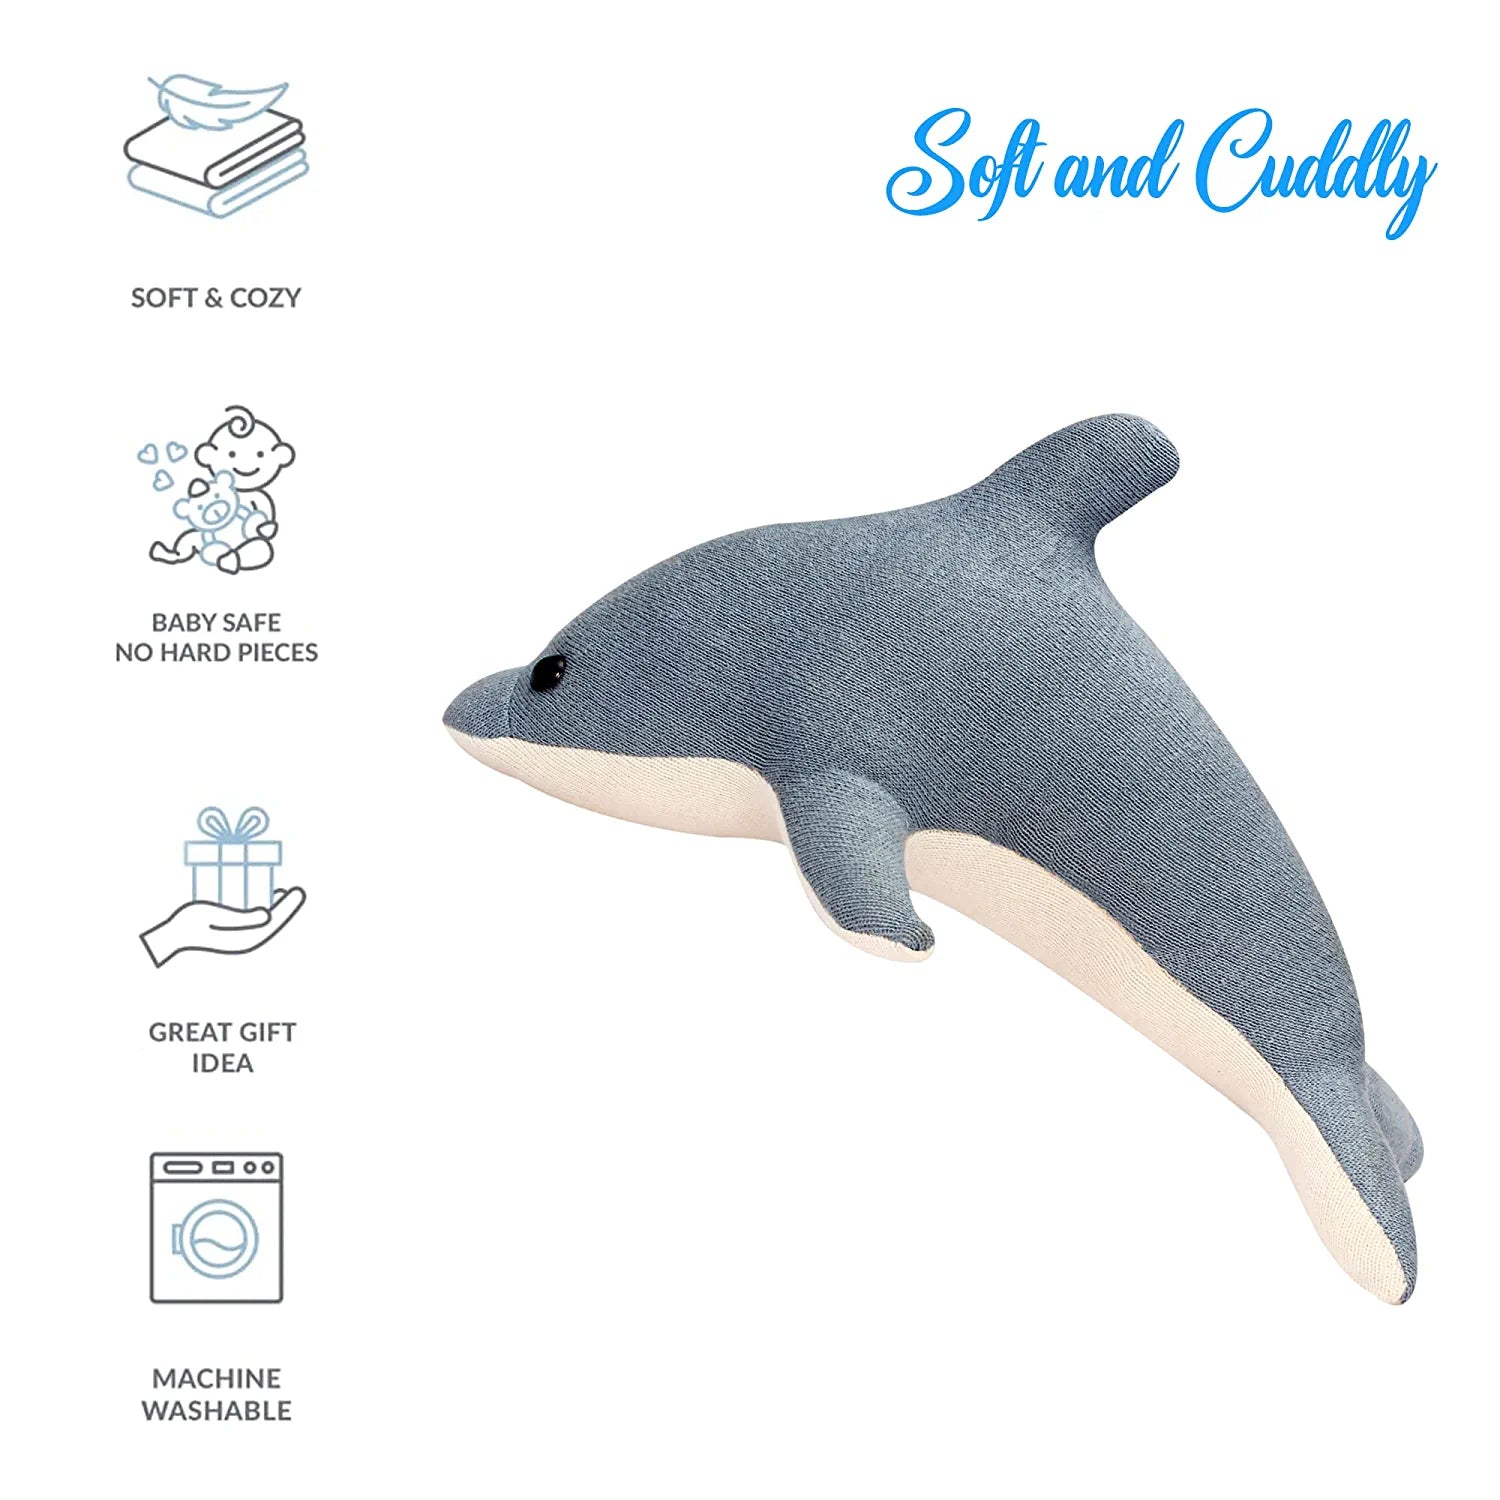 Cute Soft Stuffed Dolphin Baby Toy with Cute Black Eyes Dolphin Fish Doll Soft Toys for Kids